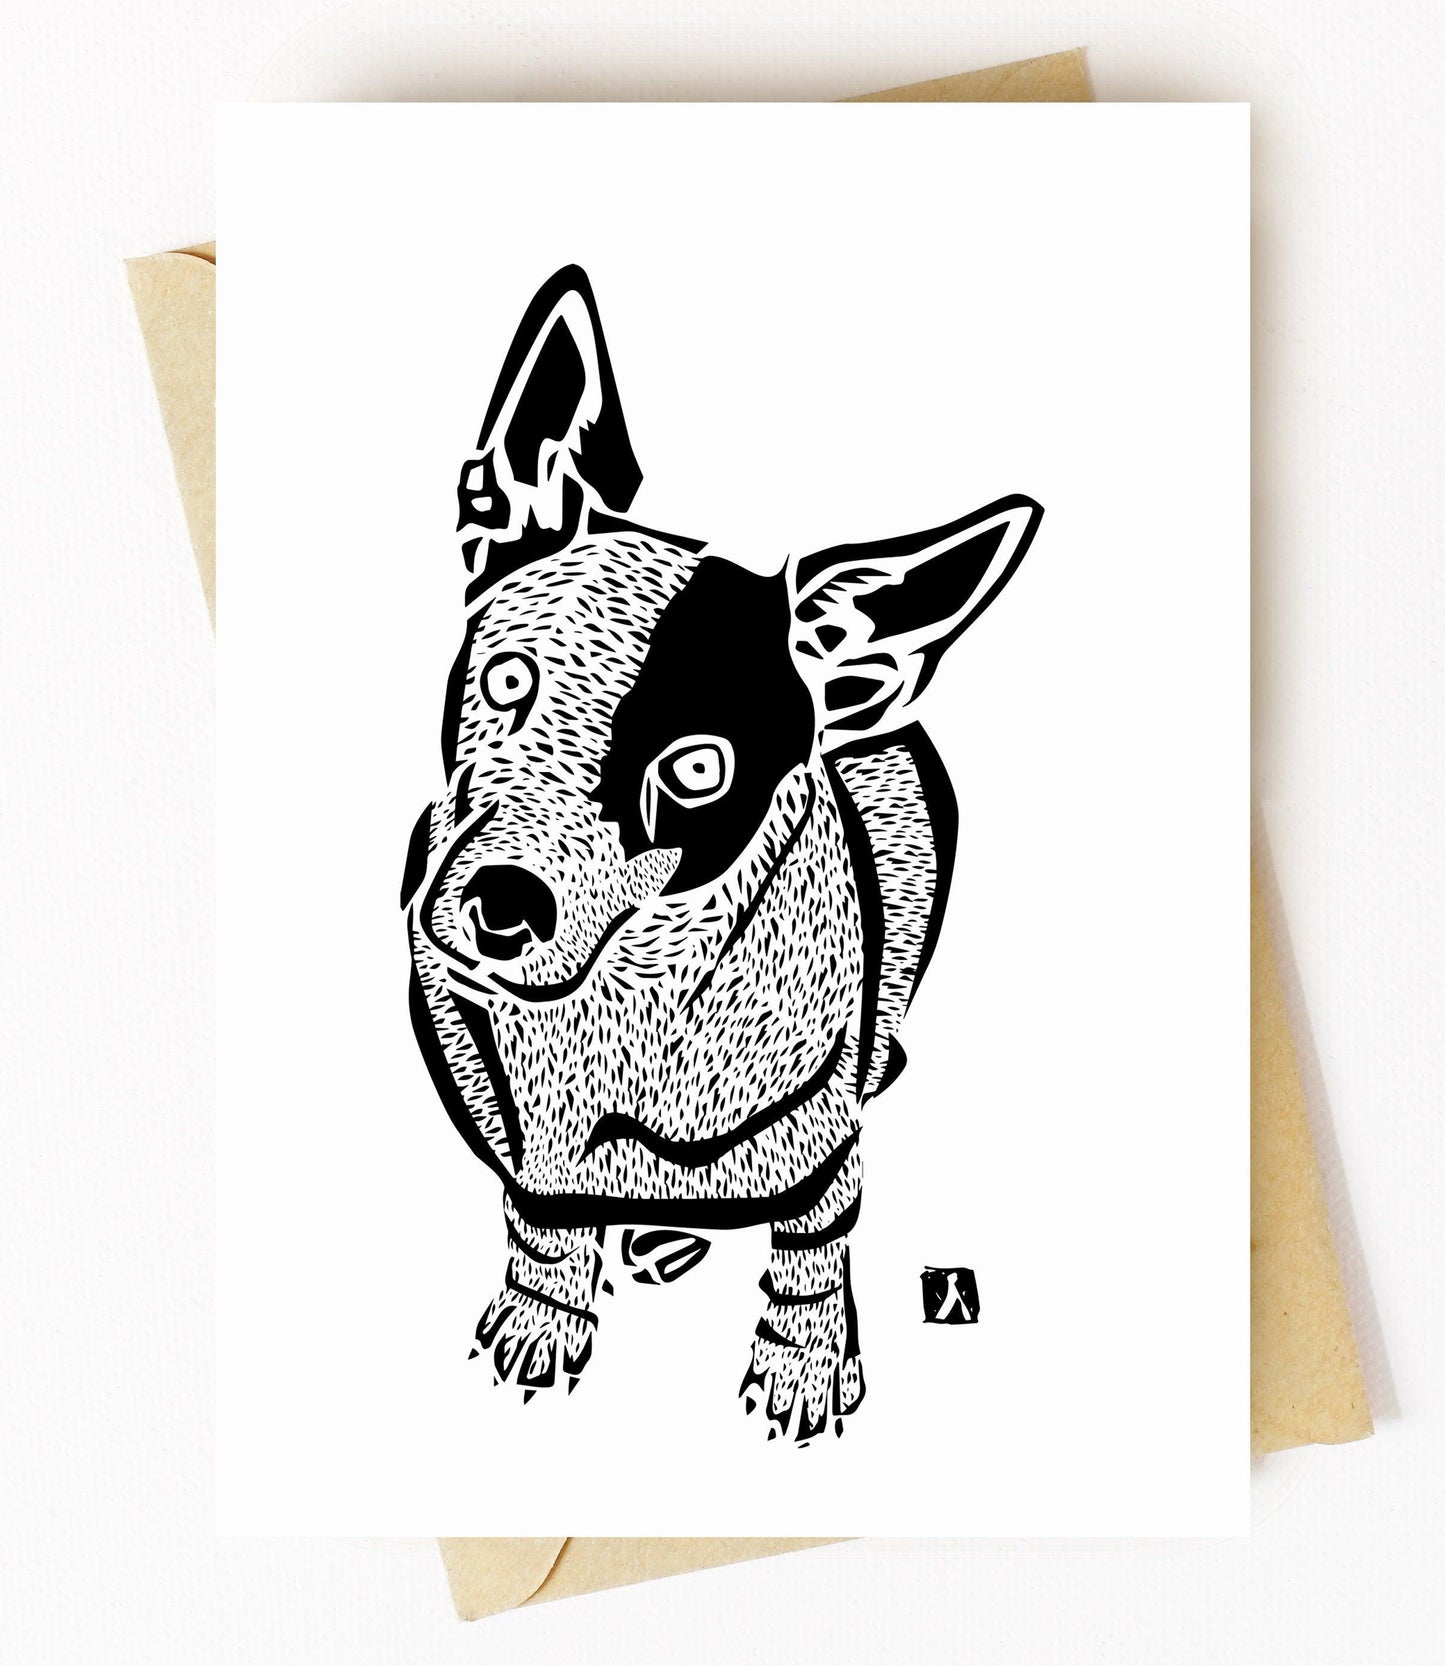 BellavanceInk: Greeting Card With Graphic Drawing of A Jack Russell Terrier 5 x 7 Inches - BellavanceInk